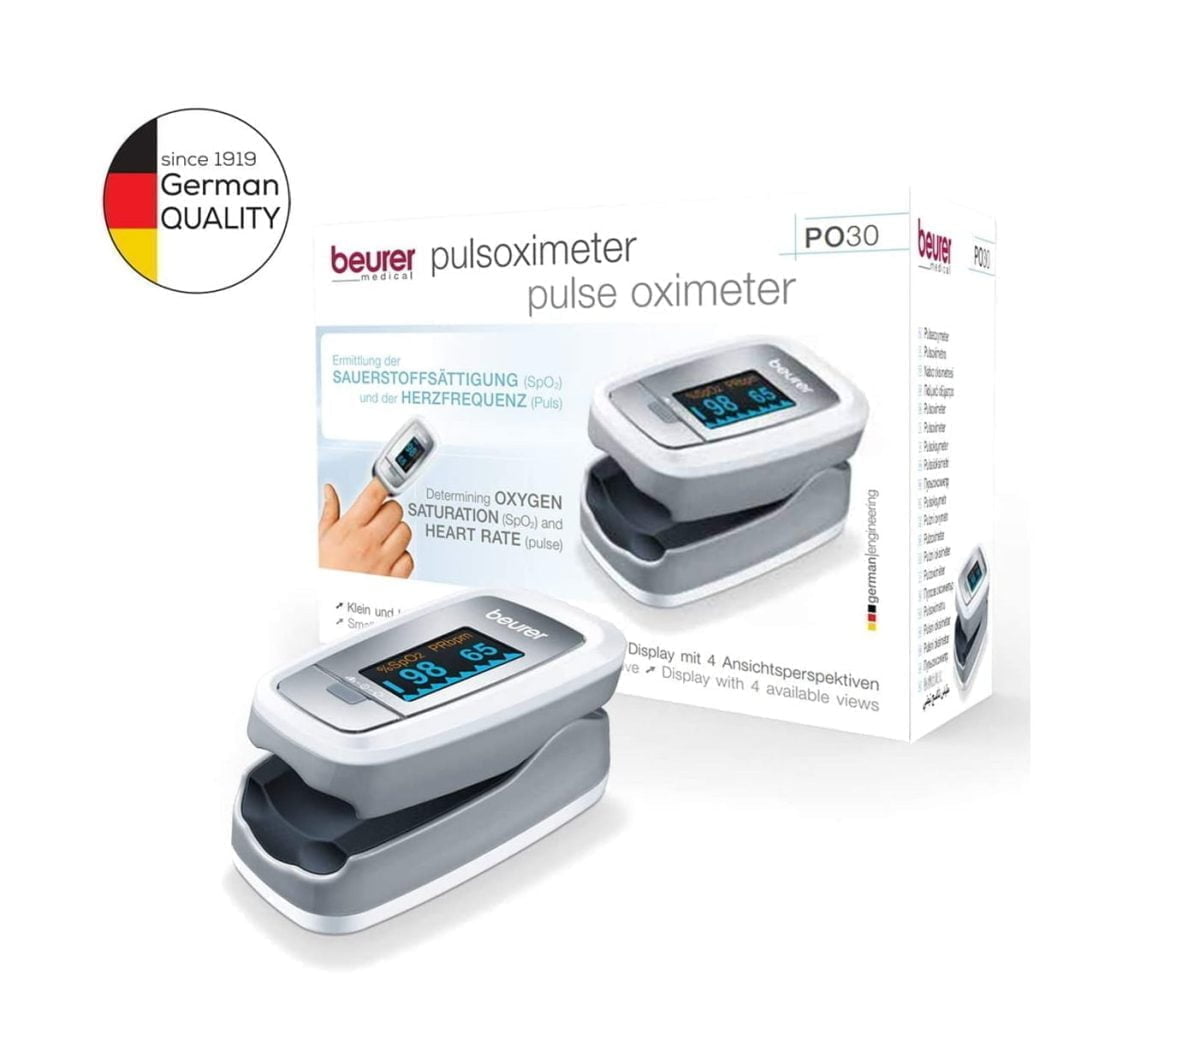 610Usbzkncl. Ac Sl1100 &Lt;H1&Gt;Beurer Po 30 Pulse Oximeter - Silver&Lt;/H1&Gt; &Lt;Ul Class=&Quot;A-Unordered-List A-Vertical A-Spacing-Mini&Quot;&Gt; &Lt;Li&Gt;&Lt;Span Class=&Quot;A-List-Item&Quot;&Gt; Measurement Of Arterial Oxygen Saturation (Spo2) And Heart Rate (Pulse) &Lt;/Span&Gt;&Lt;/Li&Gt; &Lt;Li&Gt;&Lt;Span Class=&Quot;A-List-Item&Quot;&Gt; Particularly Suitable For Persons With: Heart Failure, Chronic Obstructive Pulmonary Diseases, Bronchial Asthma &Lt;/Span&Gt;&Lt;/Li&Gt; &Lt;Li&Gt;&Lt;Span Class=&Quot;A-List-Item&Quot;&Gt; Also Suitable For Sports At High Altitudes &Lt;/Span&Gt;&Lt;/Li&Gt; &Lt;Li&Gt;&Lt;Span Class=&Quot;A-List-Item&Quot;&Gt; Colour Display With 4 Available Views &Lt;/Span&Gt;&Lt;/Li&Gt; &Lt;Li&Gt;&Lt;Span Class=&Quot;A-List-Item&Quot;&Gt; Small And Light For Use At Home And On The Move &Lt;/Span&Gt;&Lt;/Li&Gt; &Lt;/Ul&Gt; Oximeter Beurer Po 30 Pulse Oximeter - Silver